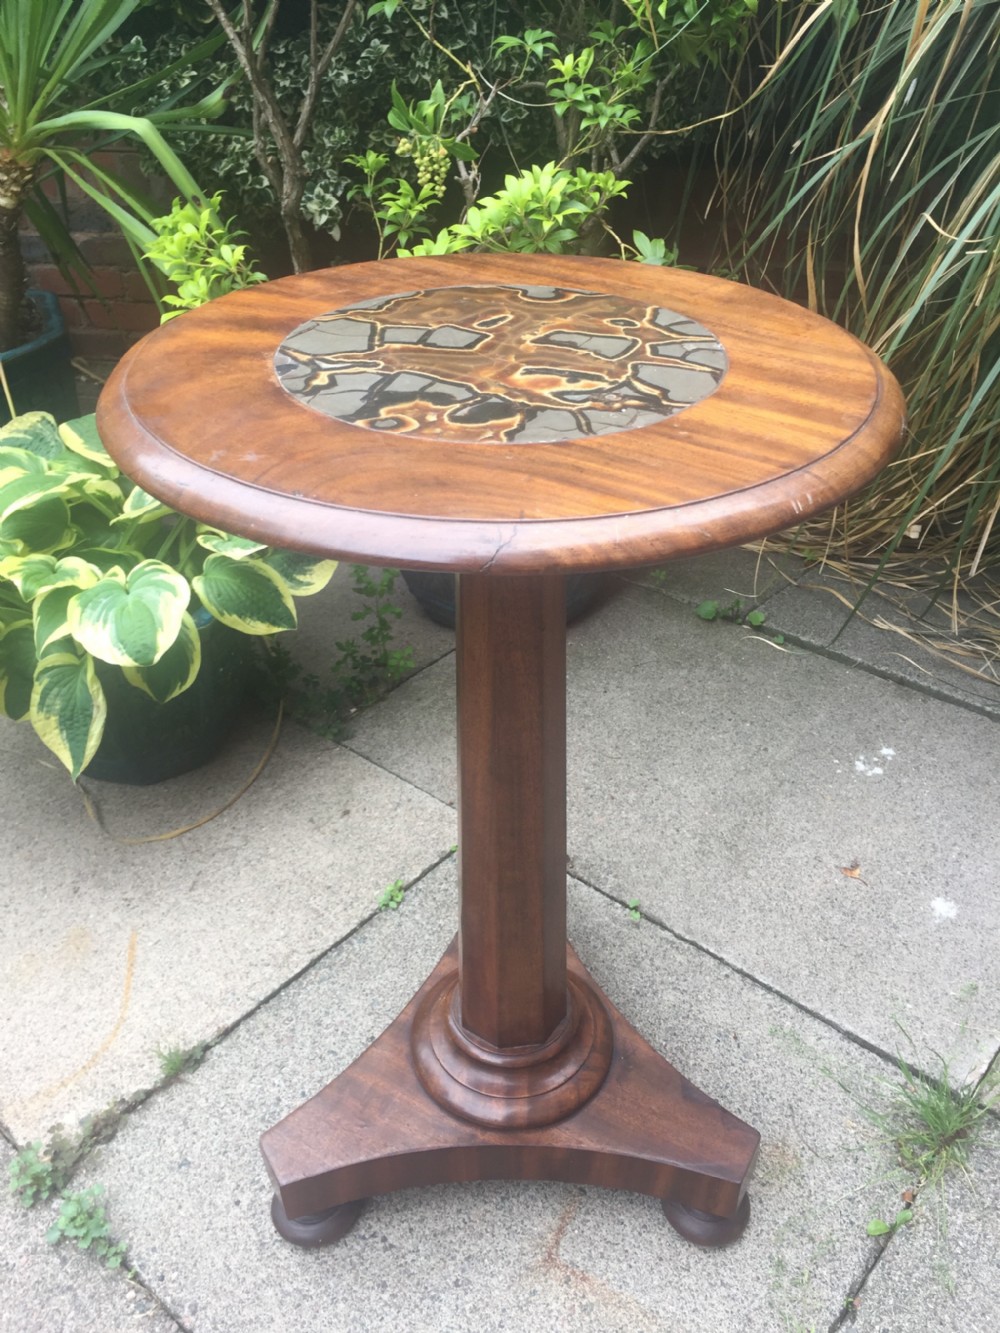 decorative c19th william iv period mahogany occasional or lamp table with rare and unusual inset specimen marble turtlestone top